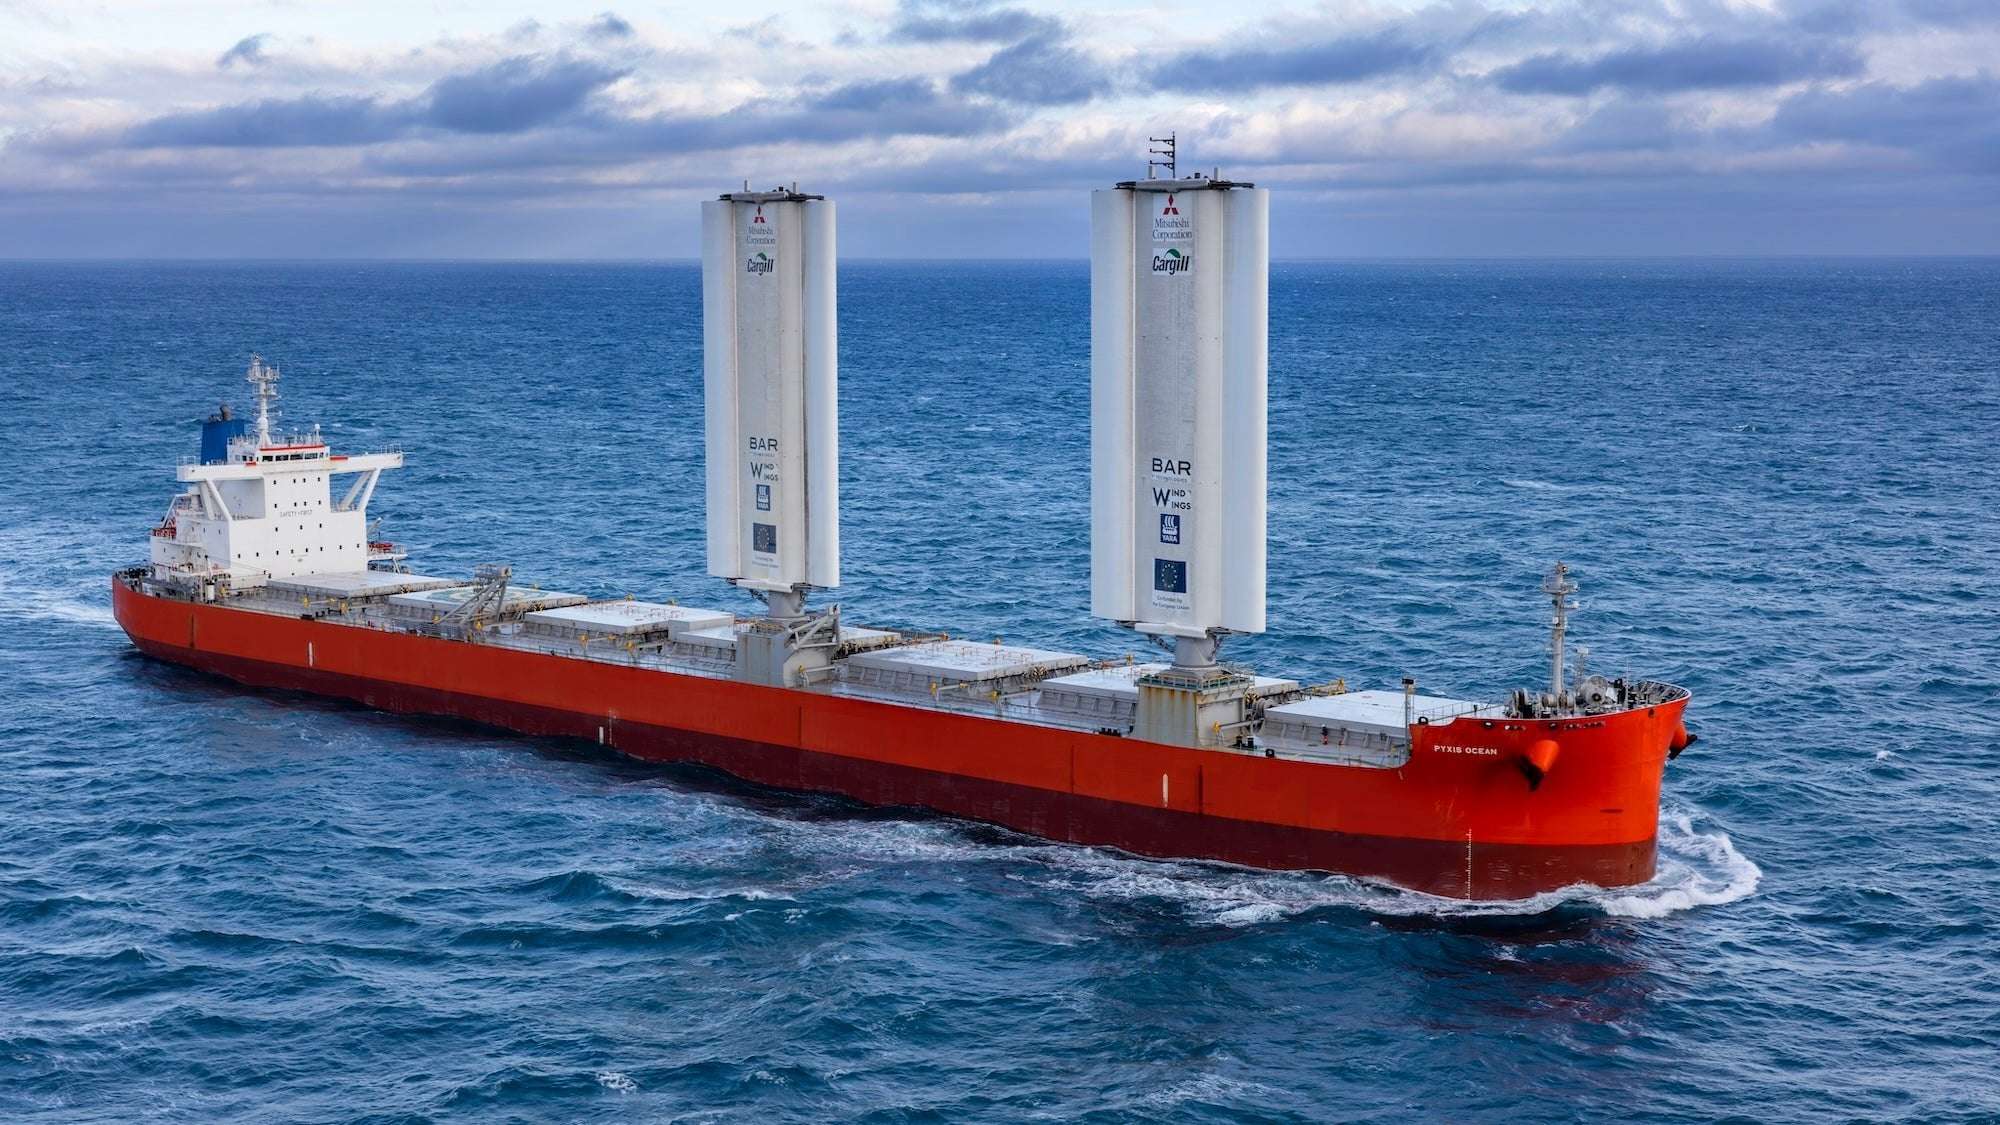 image for A cargo ship’s ‘WindWing’ sails saved it up to 12 tons of fuel per day